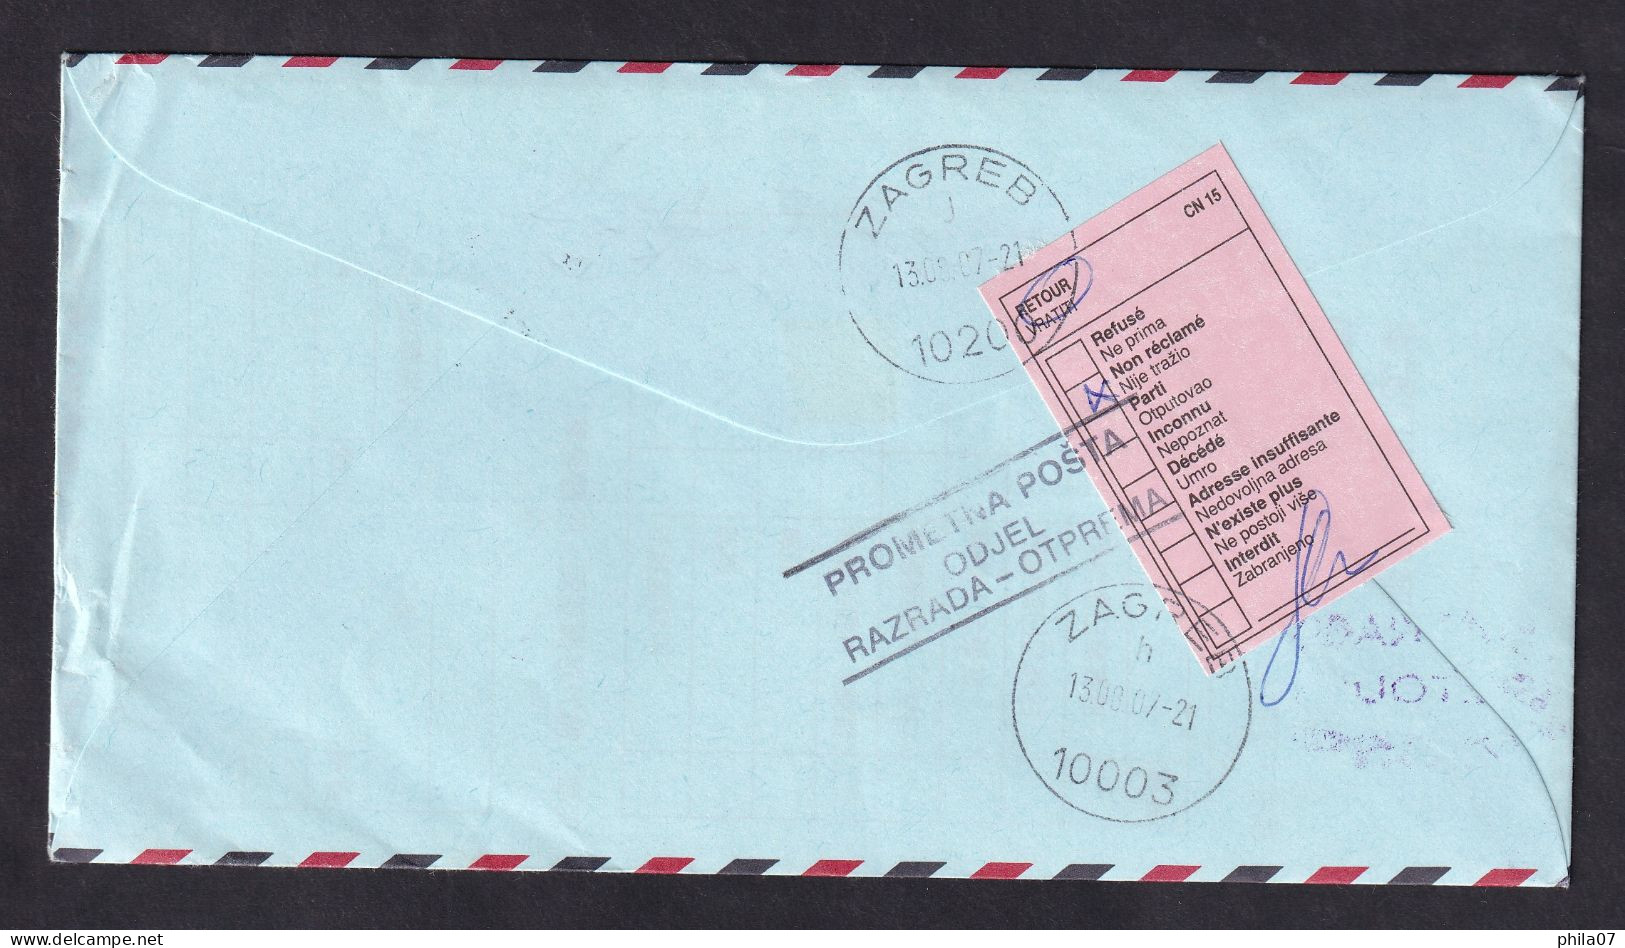 TAIWAN Envelope Sent Via Air Mail From Taiwan To Zagreb And Returned To Taiwan, Not Reclamed - Cancel On Envelope/2scans - Briefe U. Dokumente